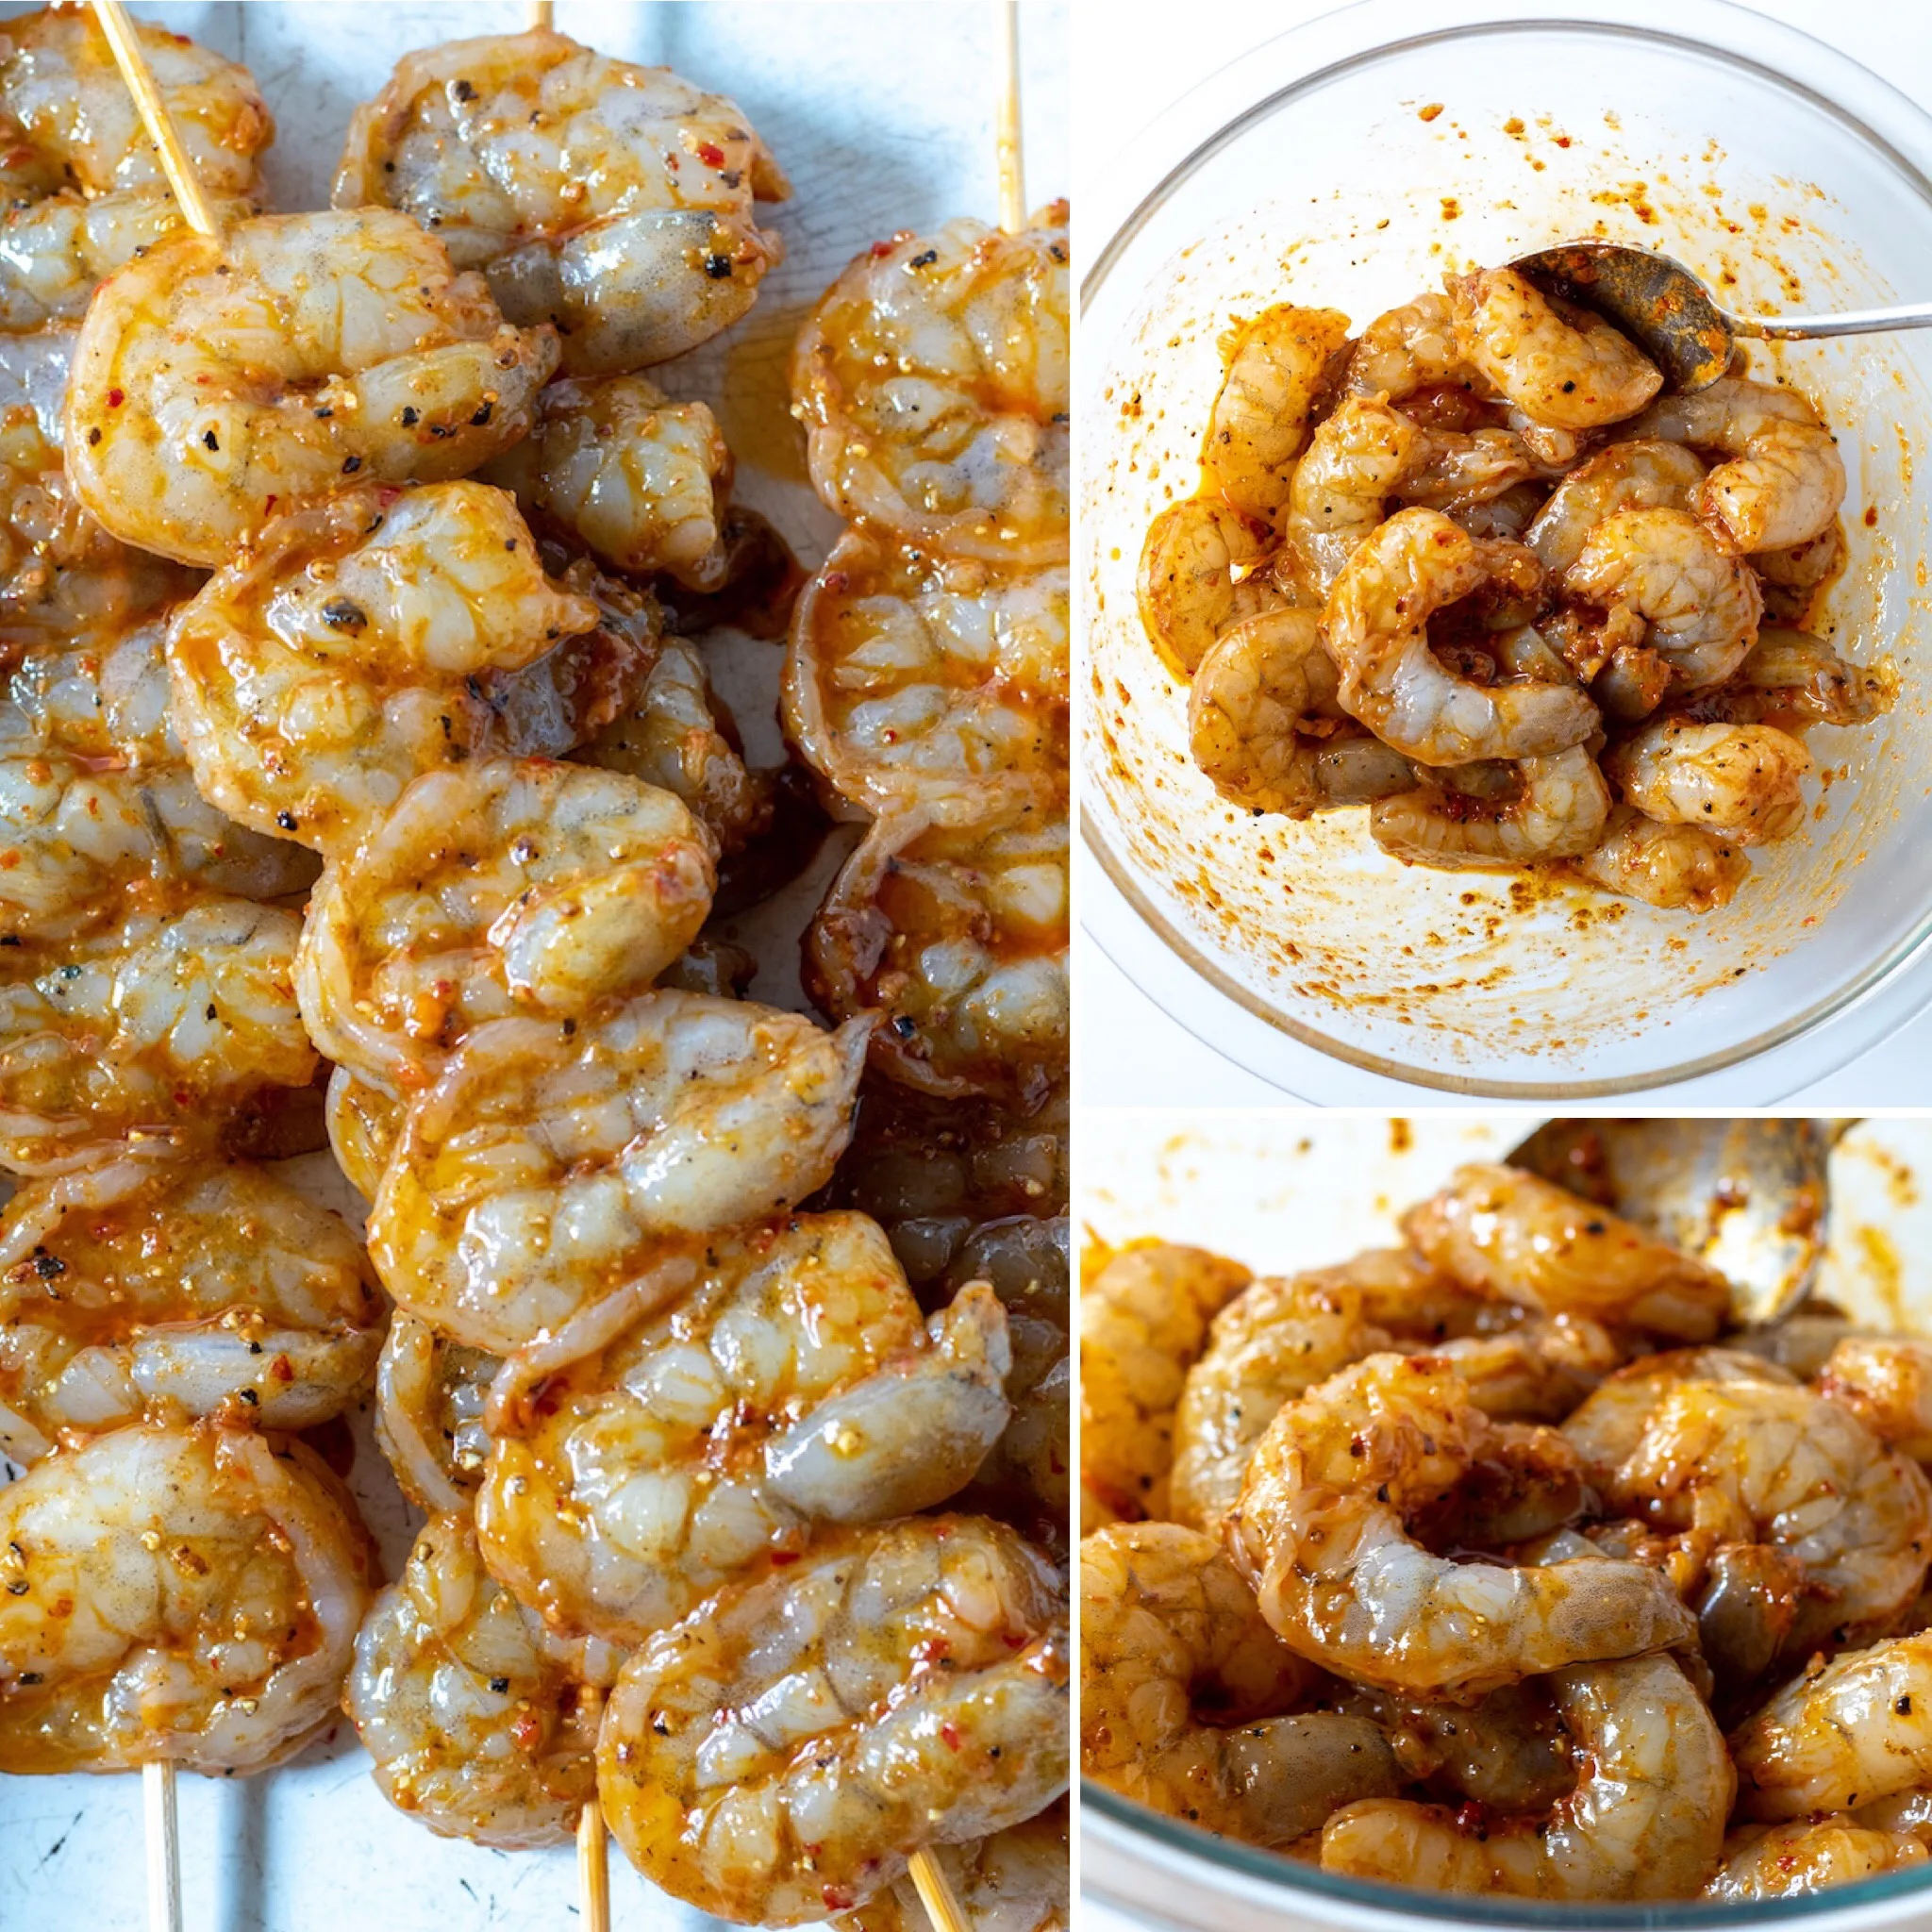 Three photo collage of marinated shrimp and skewers ready for grilling.